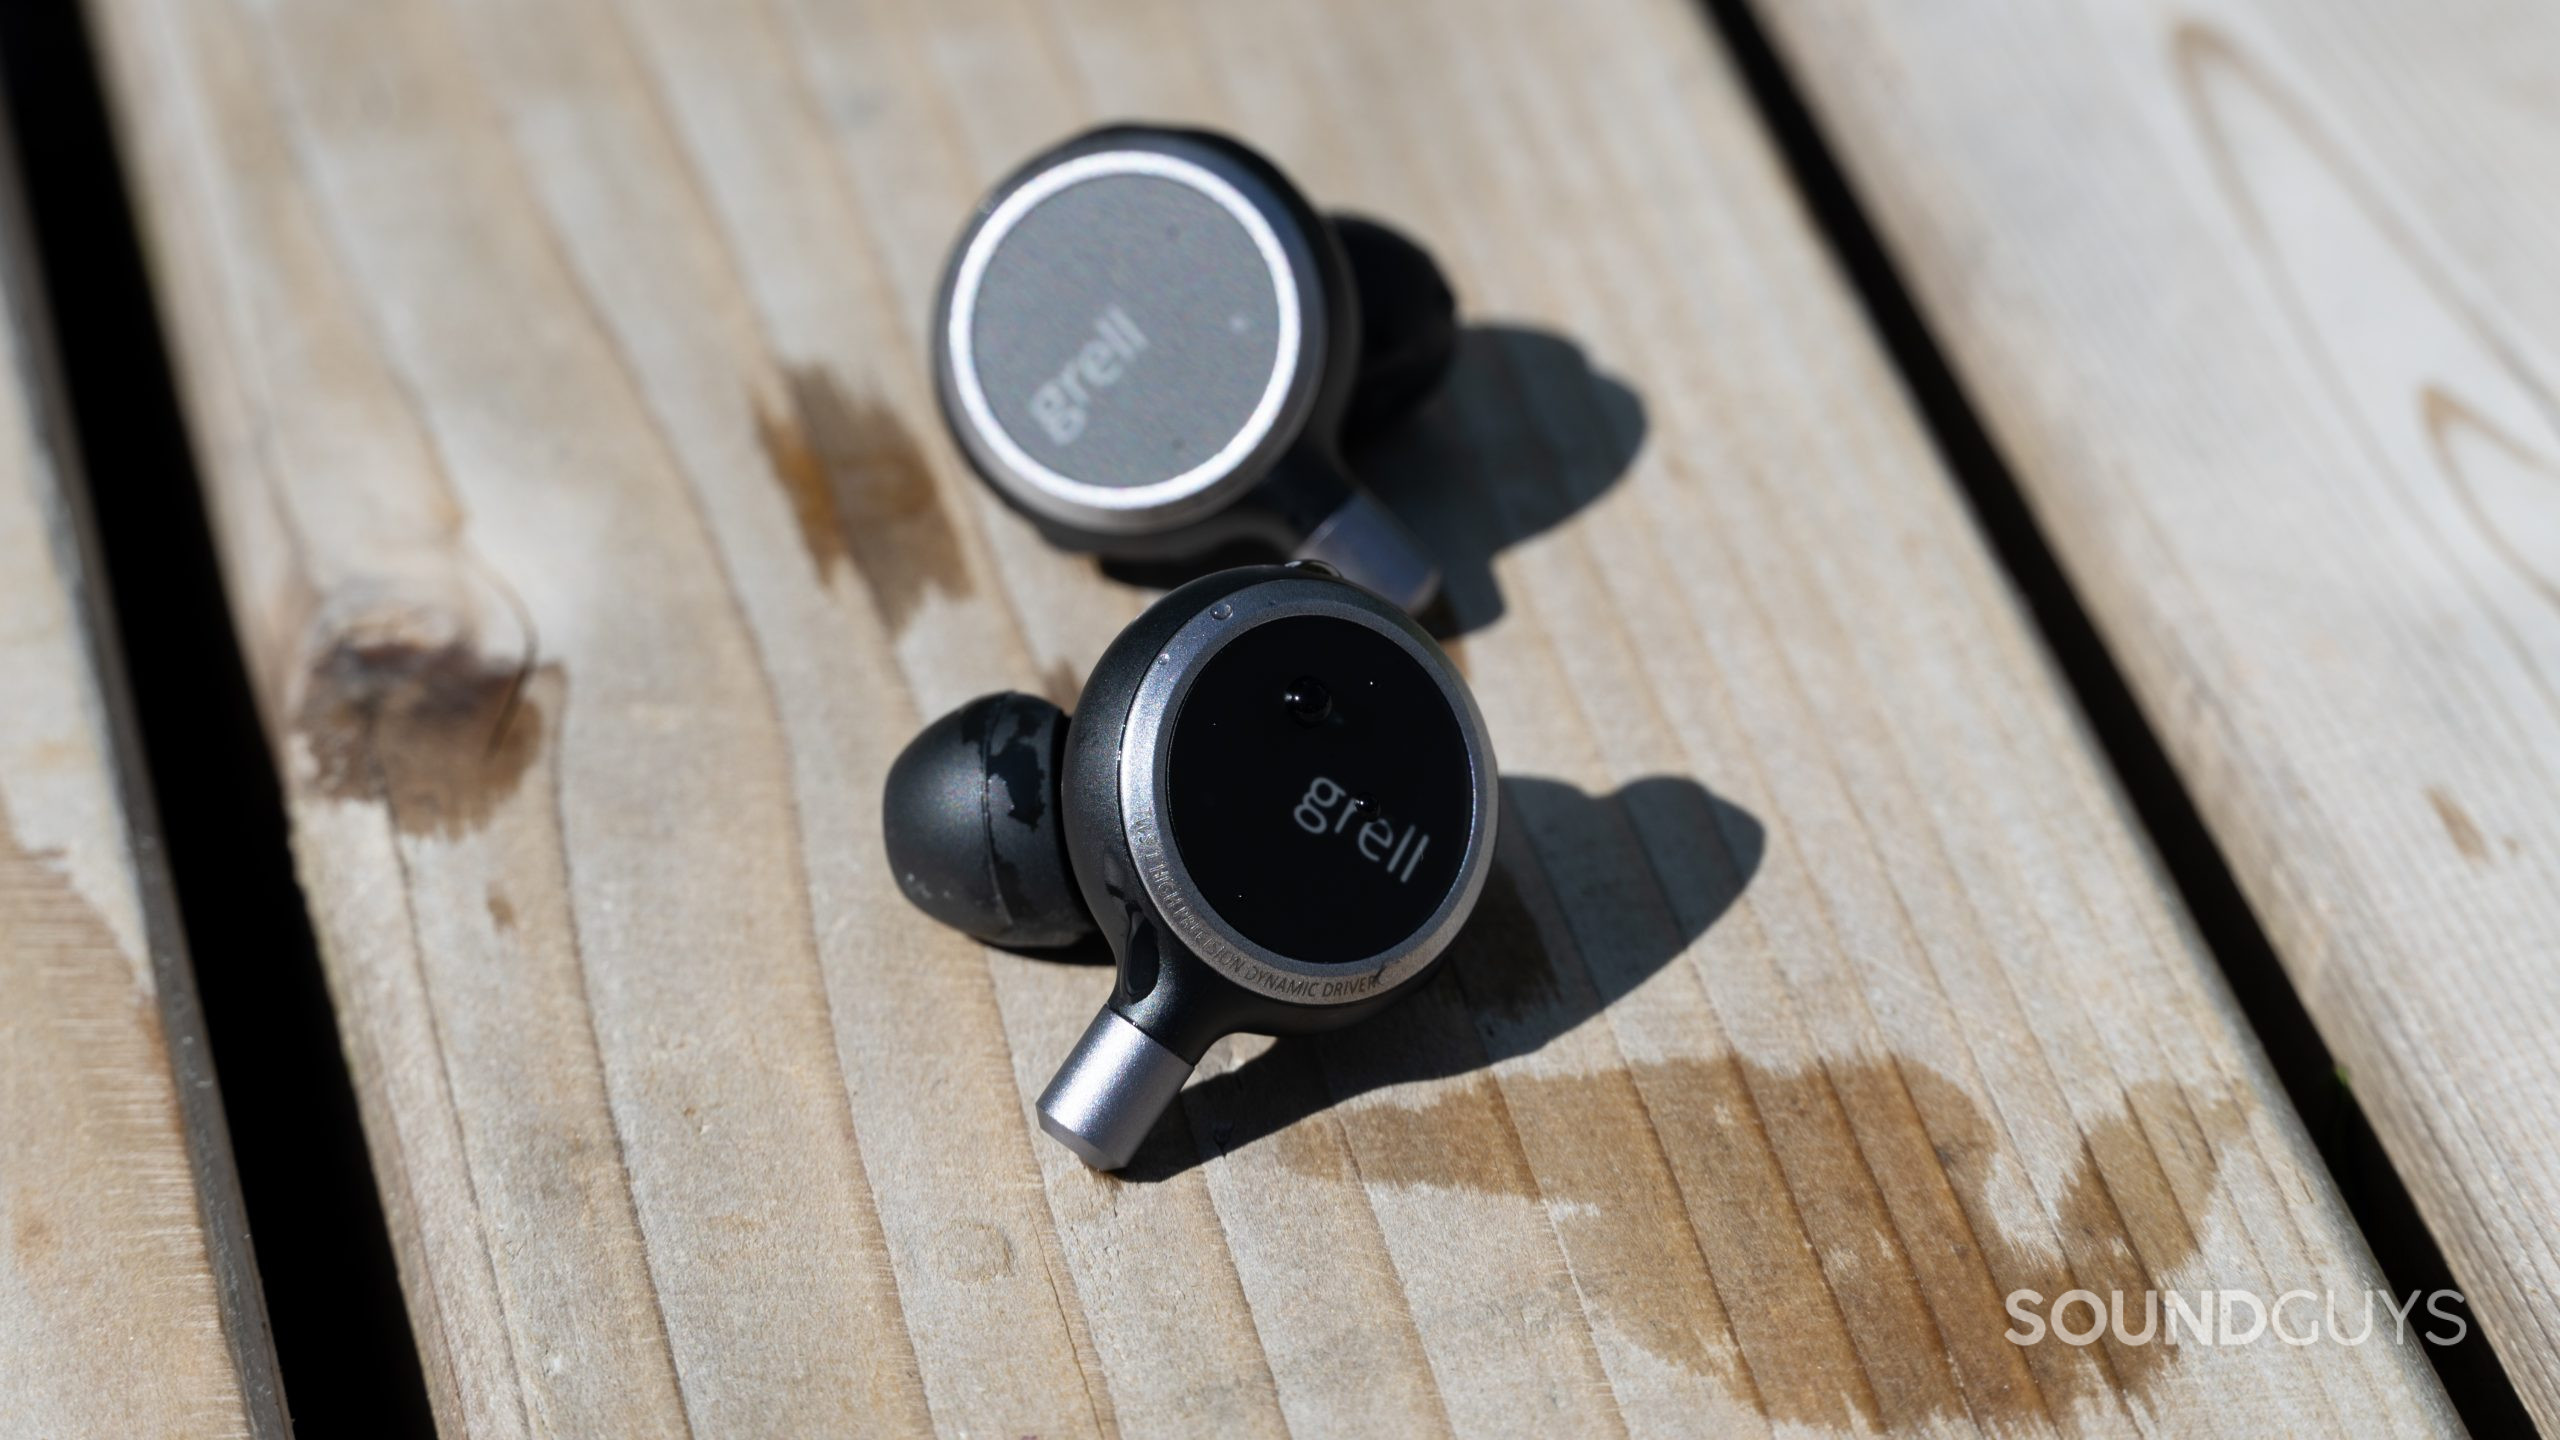 Grell Audio TWS 1 earbuds splashed in water.